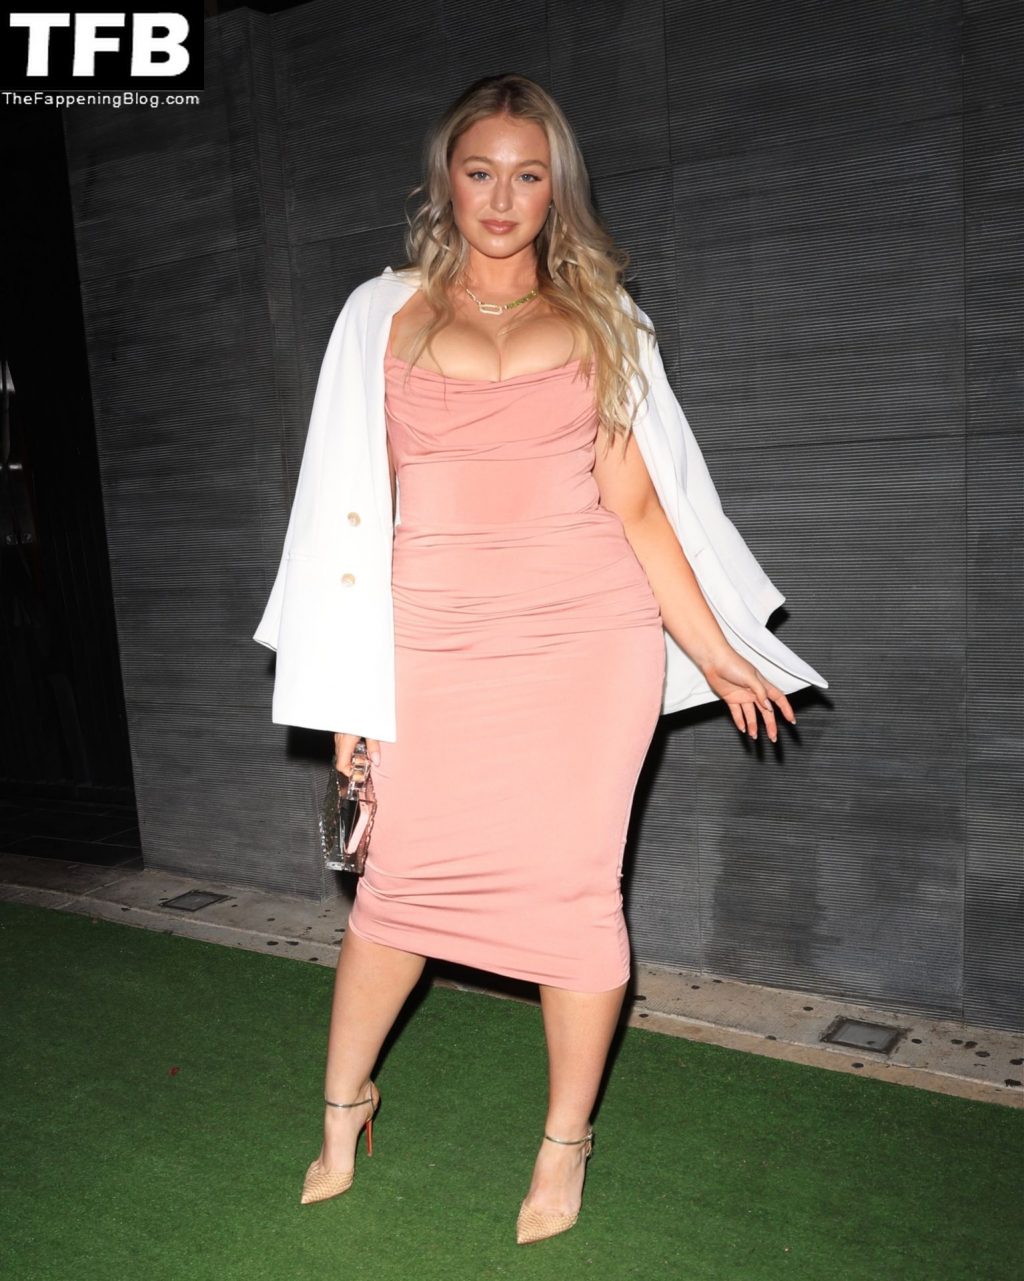 Iskra Lawrence Sexy The Fappening Blog 5 1024x1281 - Iskra Lawrence Displays Her Curves While Grabbing Dinner at Nobu (24 Photos + Video)